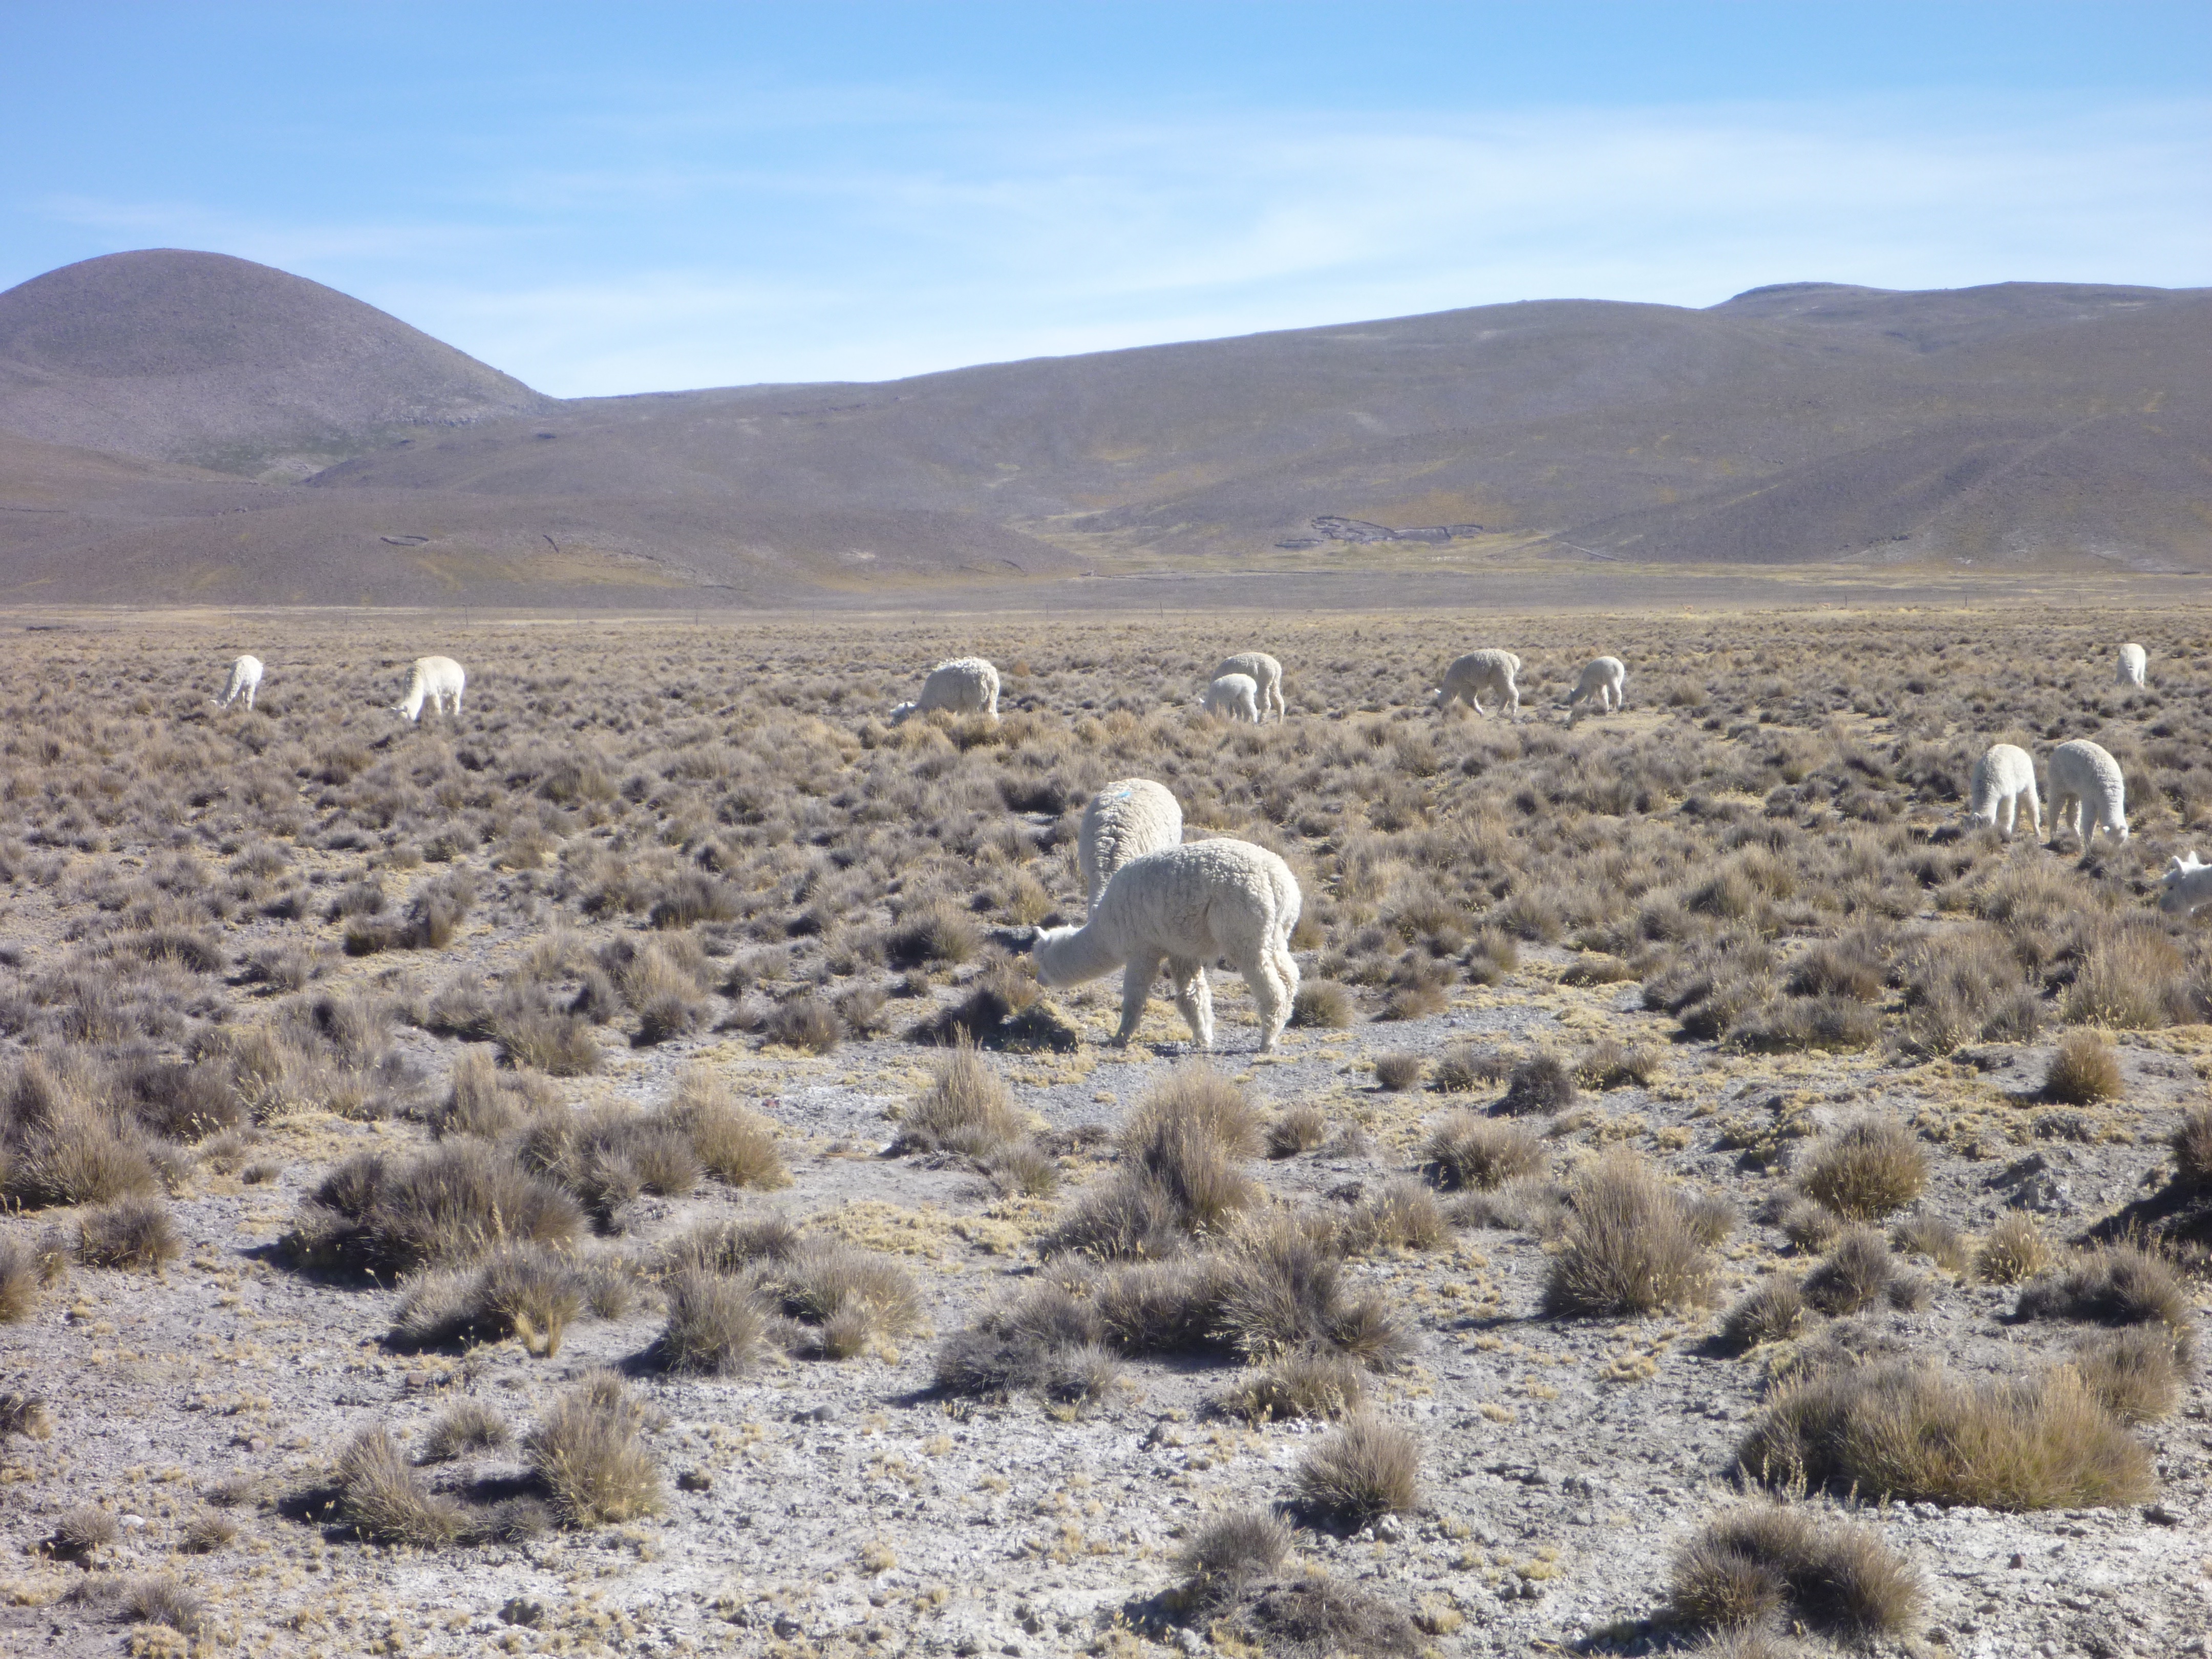 Vicuña they are a protected species of Alpaca that live only in the Andes 